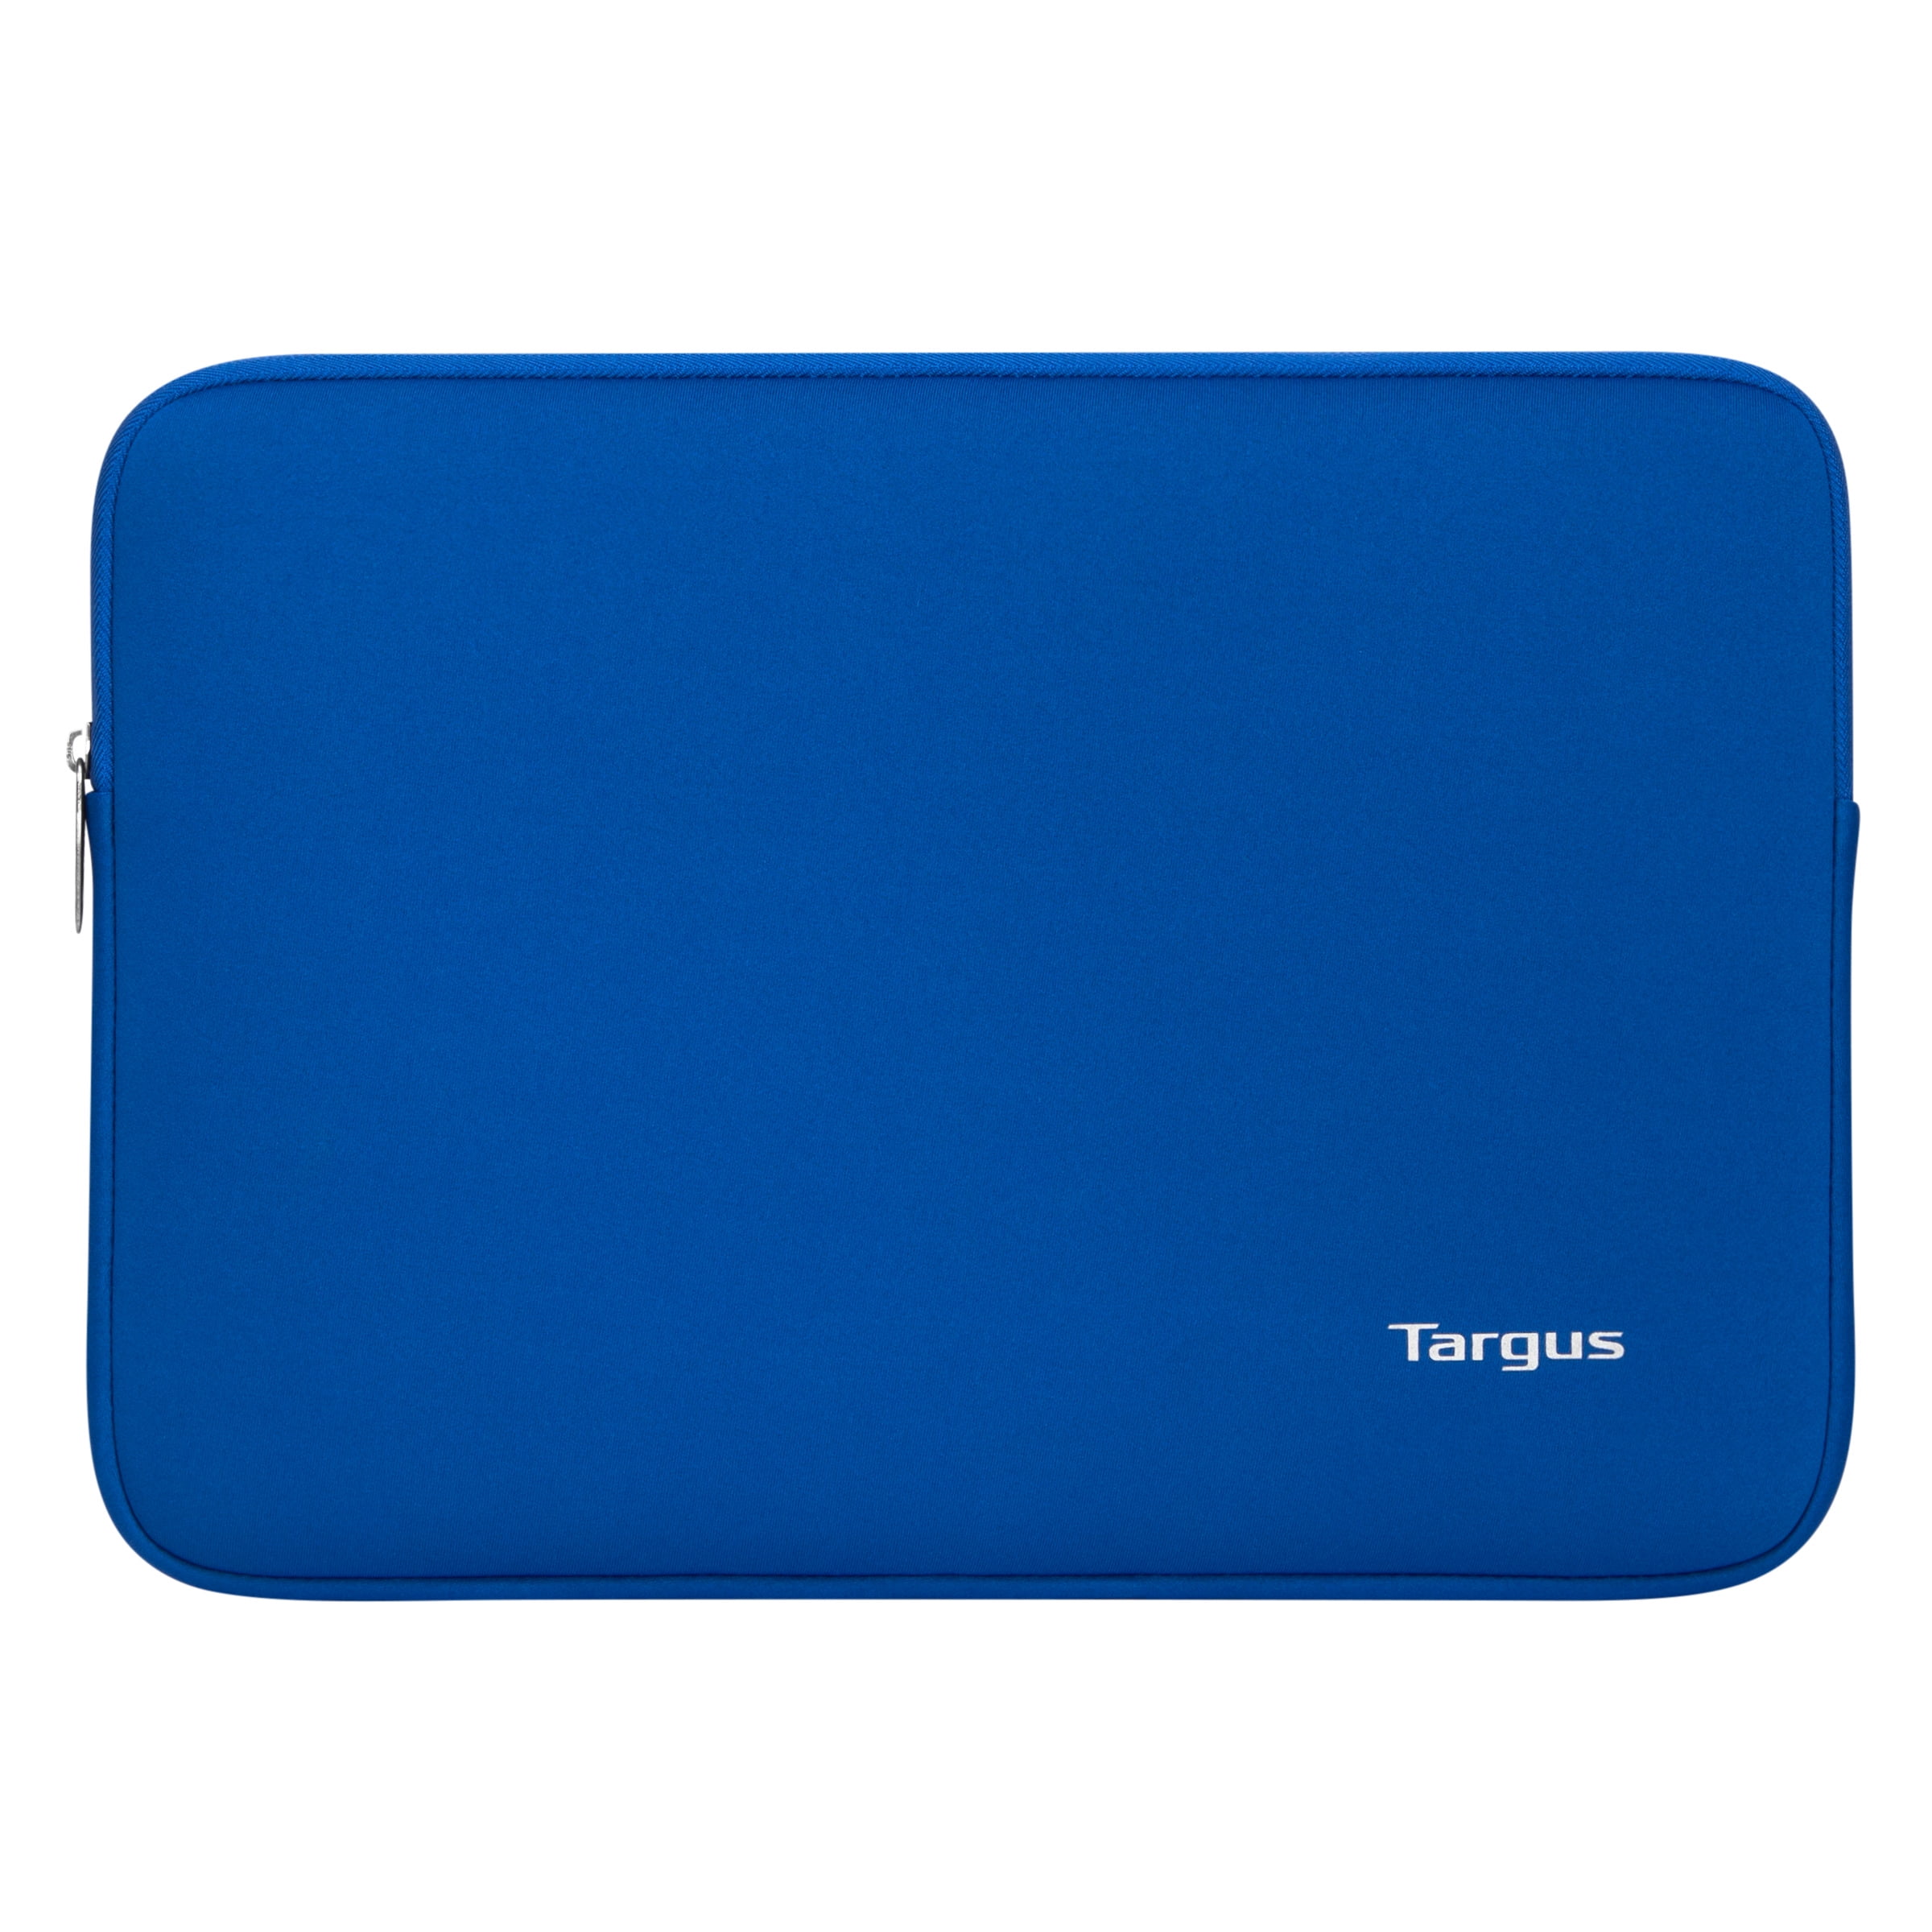 Buy Greatunlimited Laptop Sleeve Products Online in Nuuk at Best Prices on  desertcart Greenland